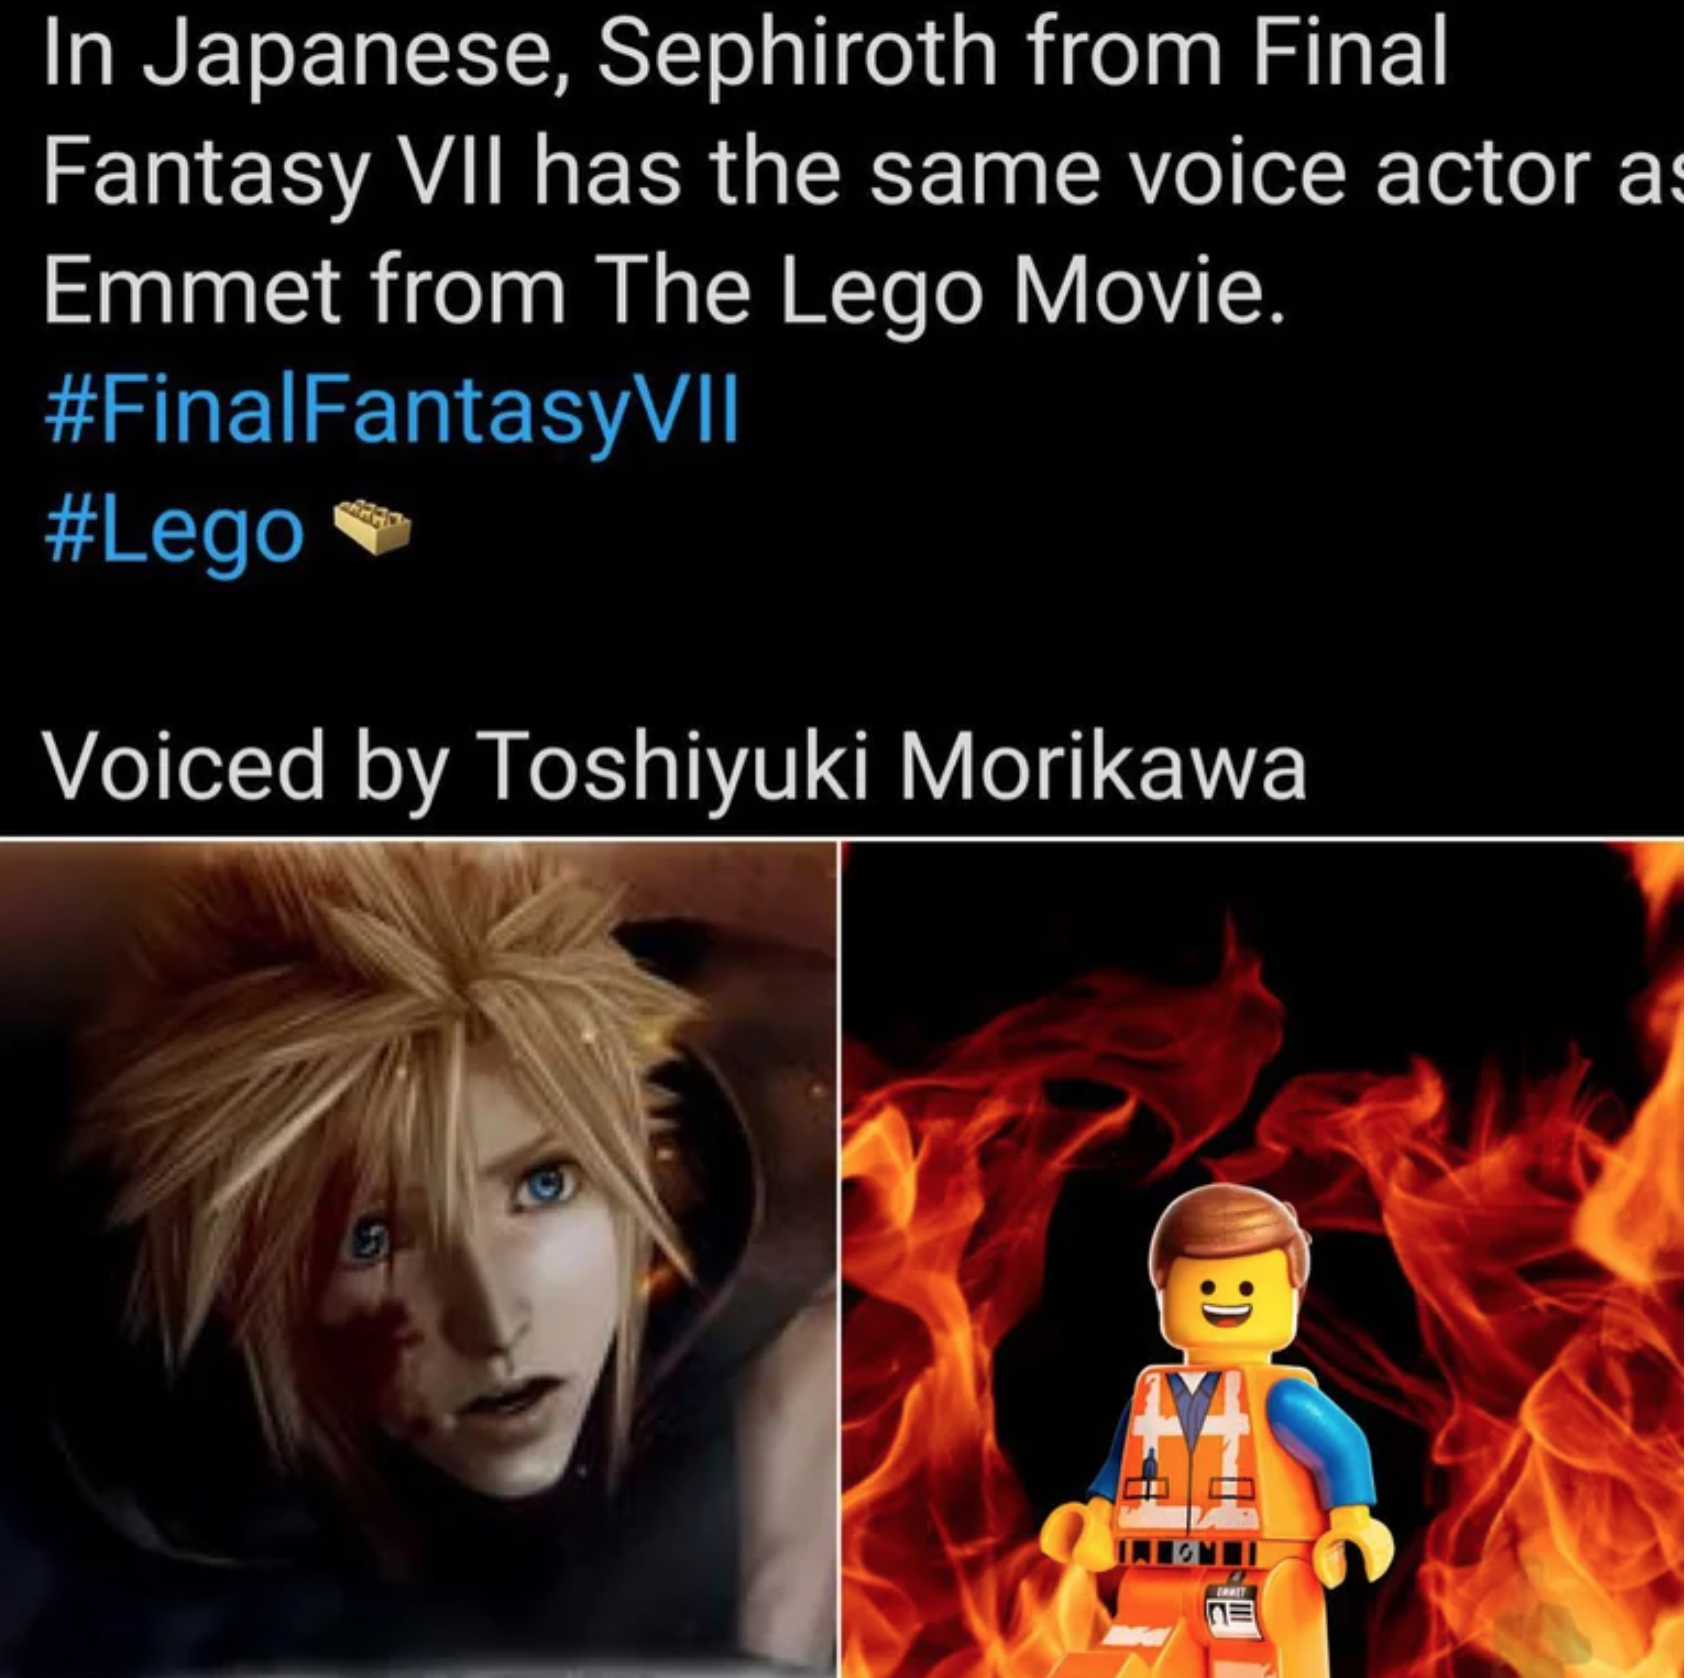 funny gaming memes - cartoon - In Japanese, Sephiroth from Final Fantasy Vii has the same voice actor a Emmet from The Lego Movie. Voiced by Toshiyuki Morikawa nel